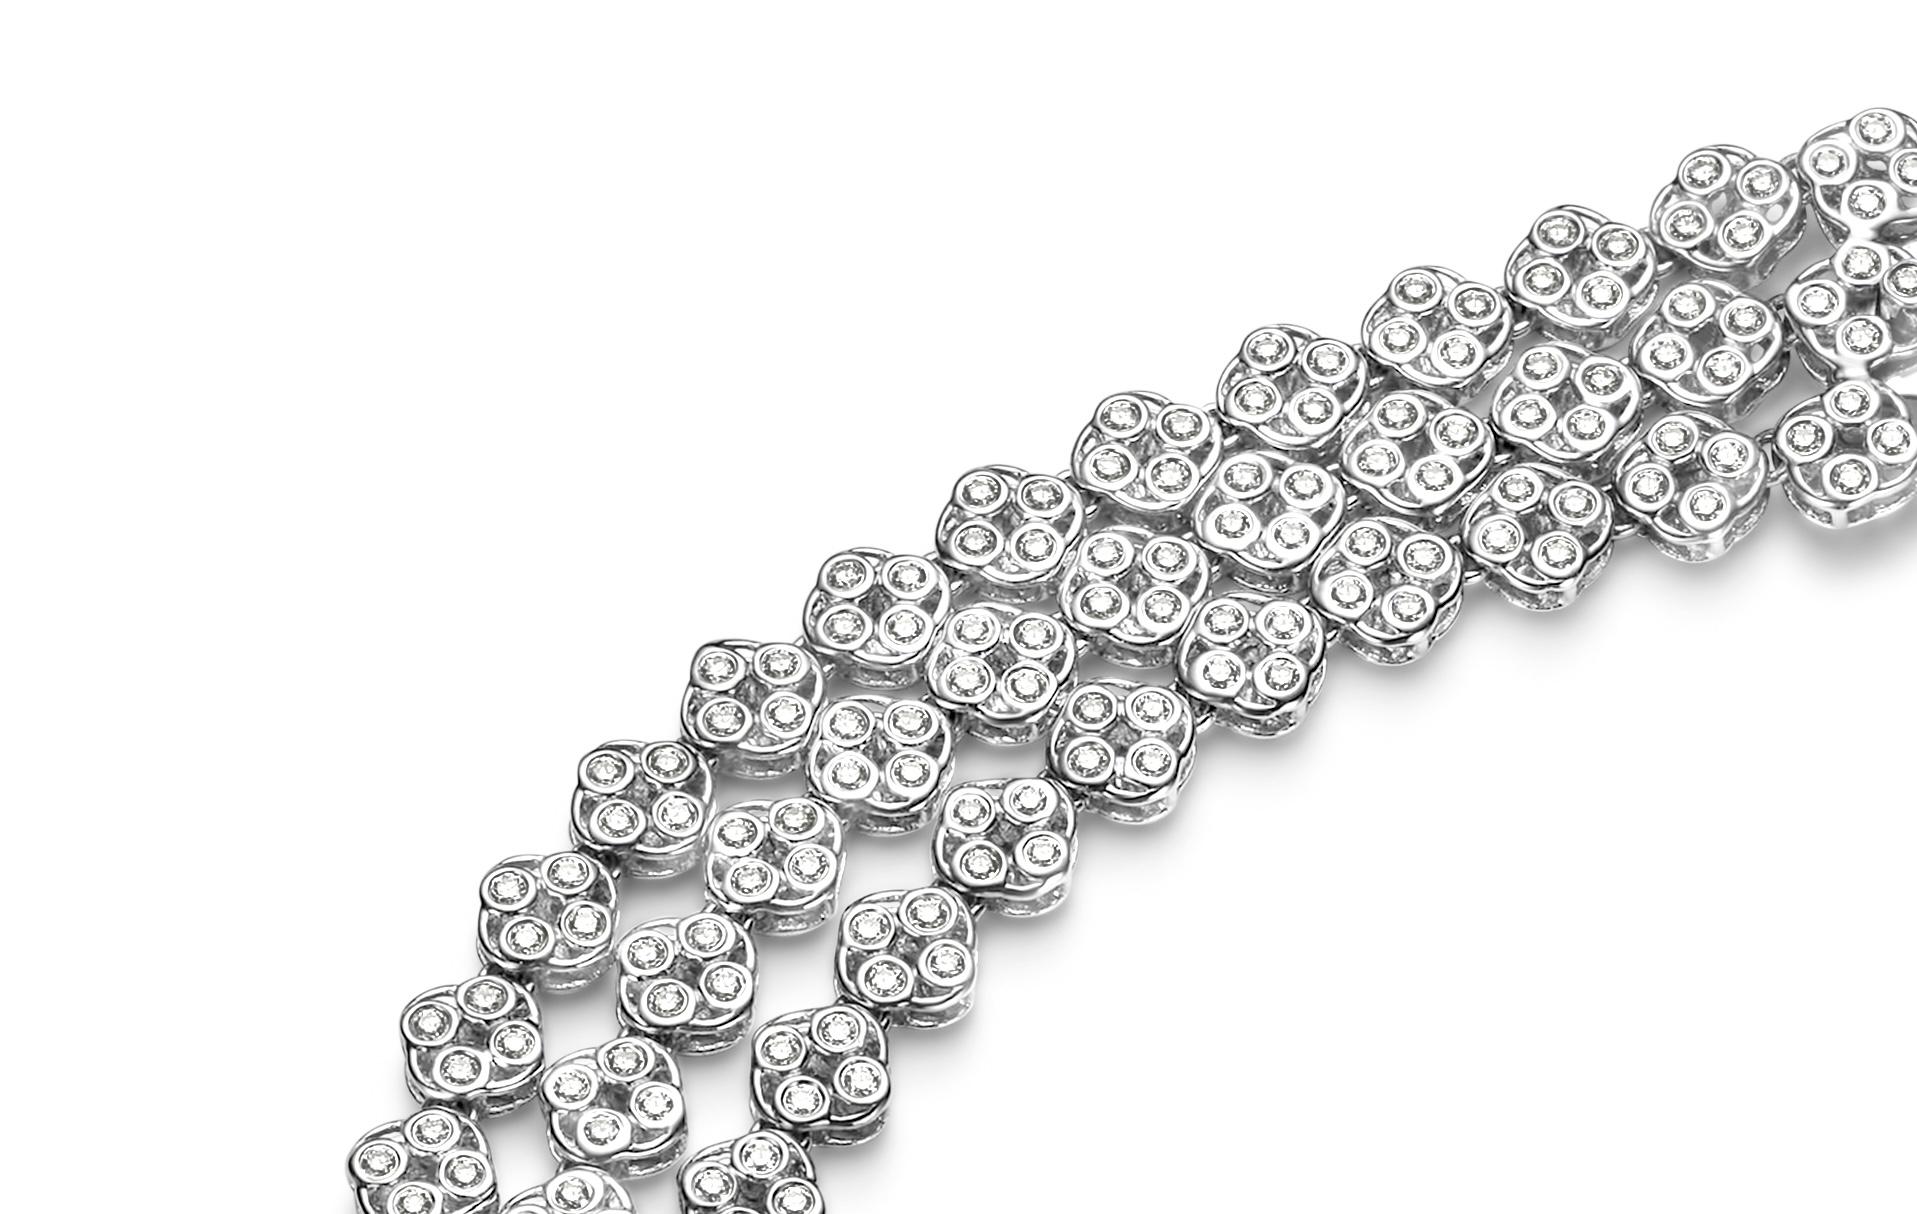 Fabulous 18 kt. White Gold 3 Row Tennis Bracelet With 10.57 ct. Round Cut Diamonds

Diamonds: Brilliant cut diamonds, together 10.57 ct. 

Material: 18 kt. white gold

Measurements: 16 cm x 25.5 mm x 3 mm ( can be resized to measure)

Total weight: